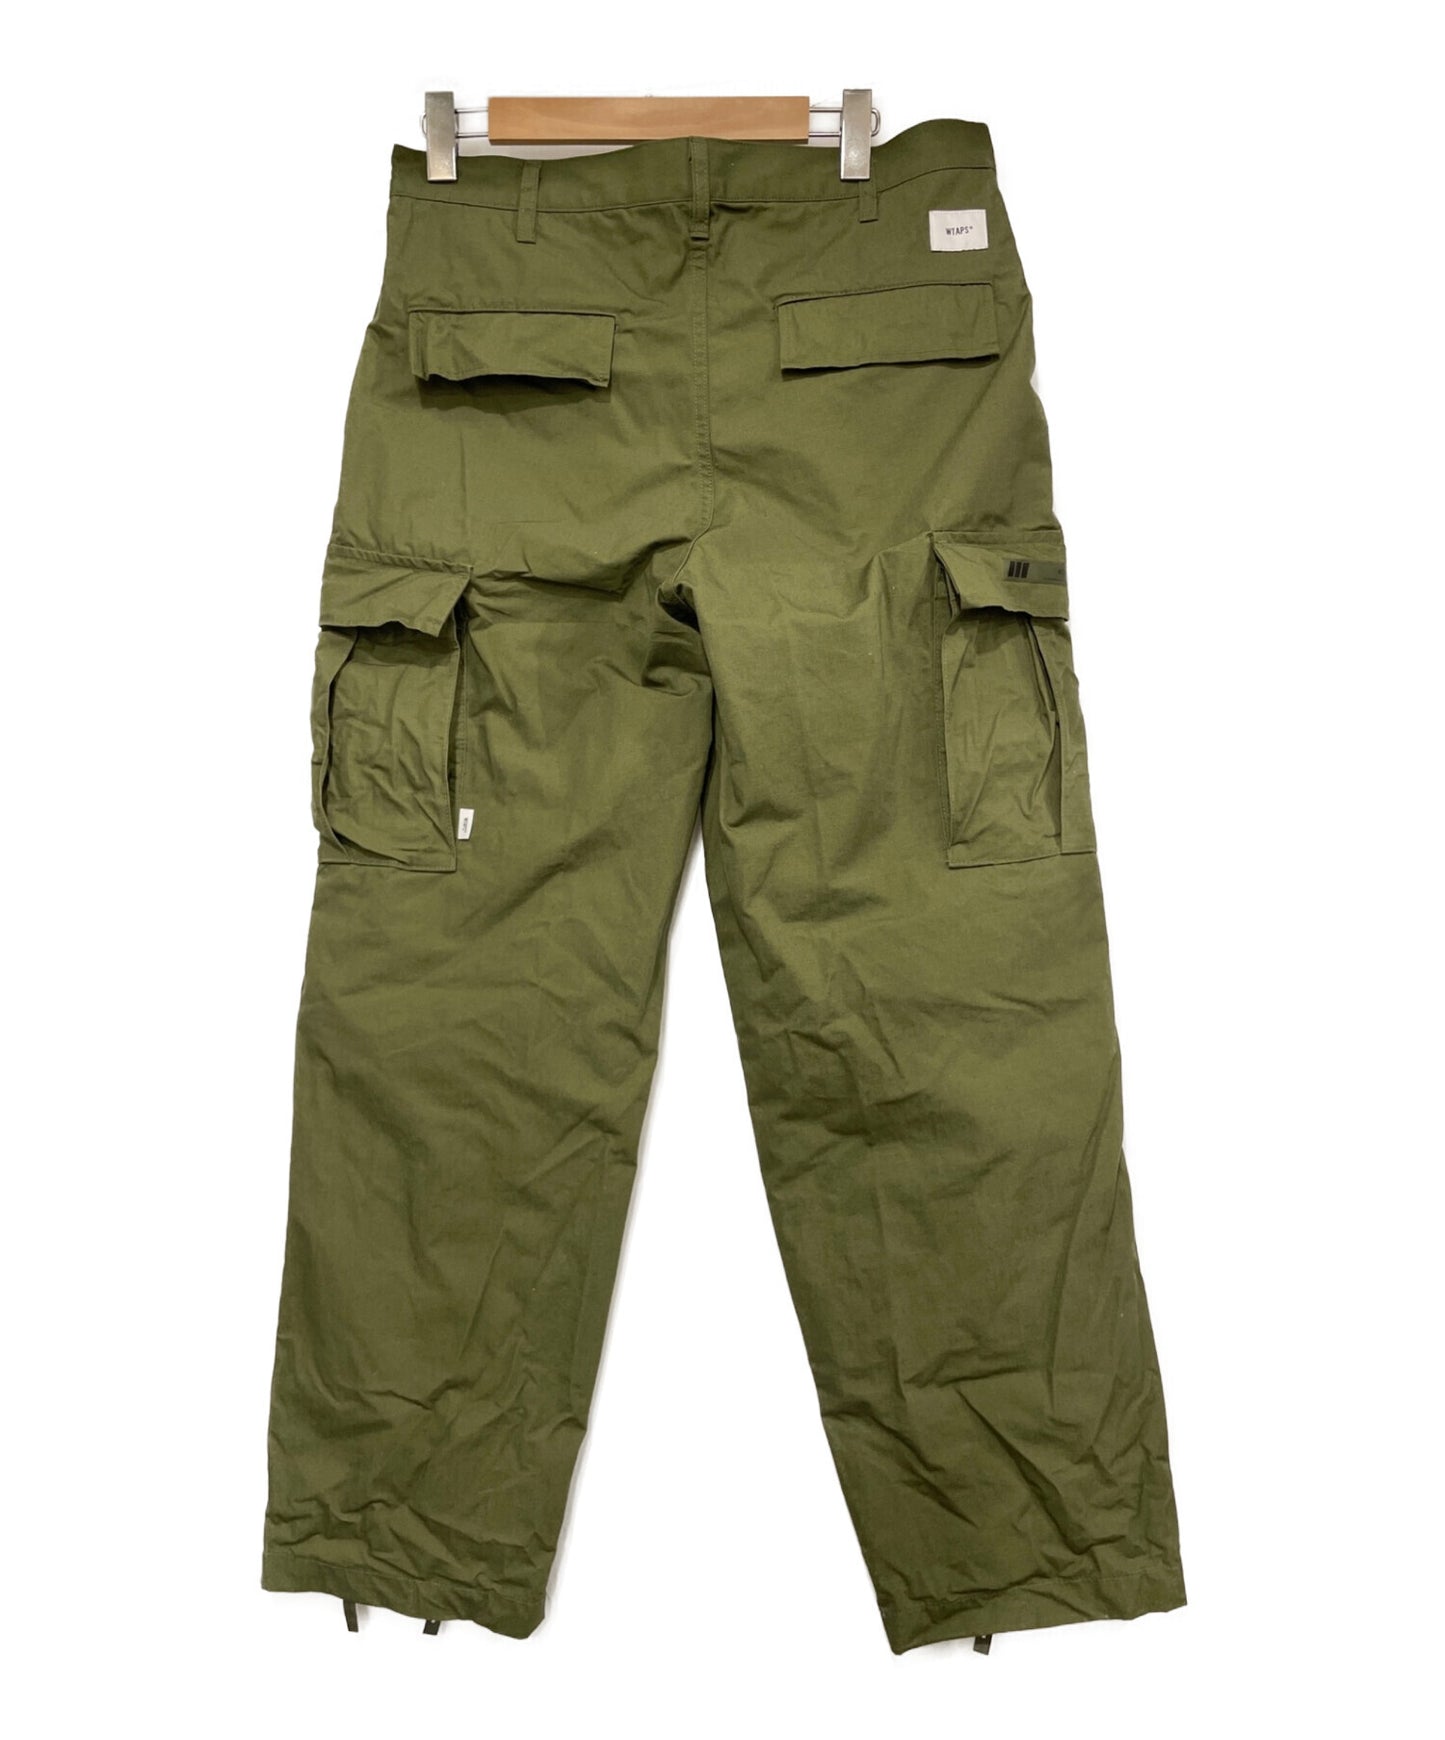 [Pre-owned] WTAPS JUNGLE STOCK TROUSERS 222wvdt-ptm07